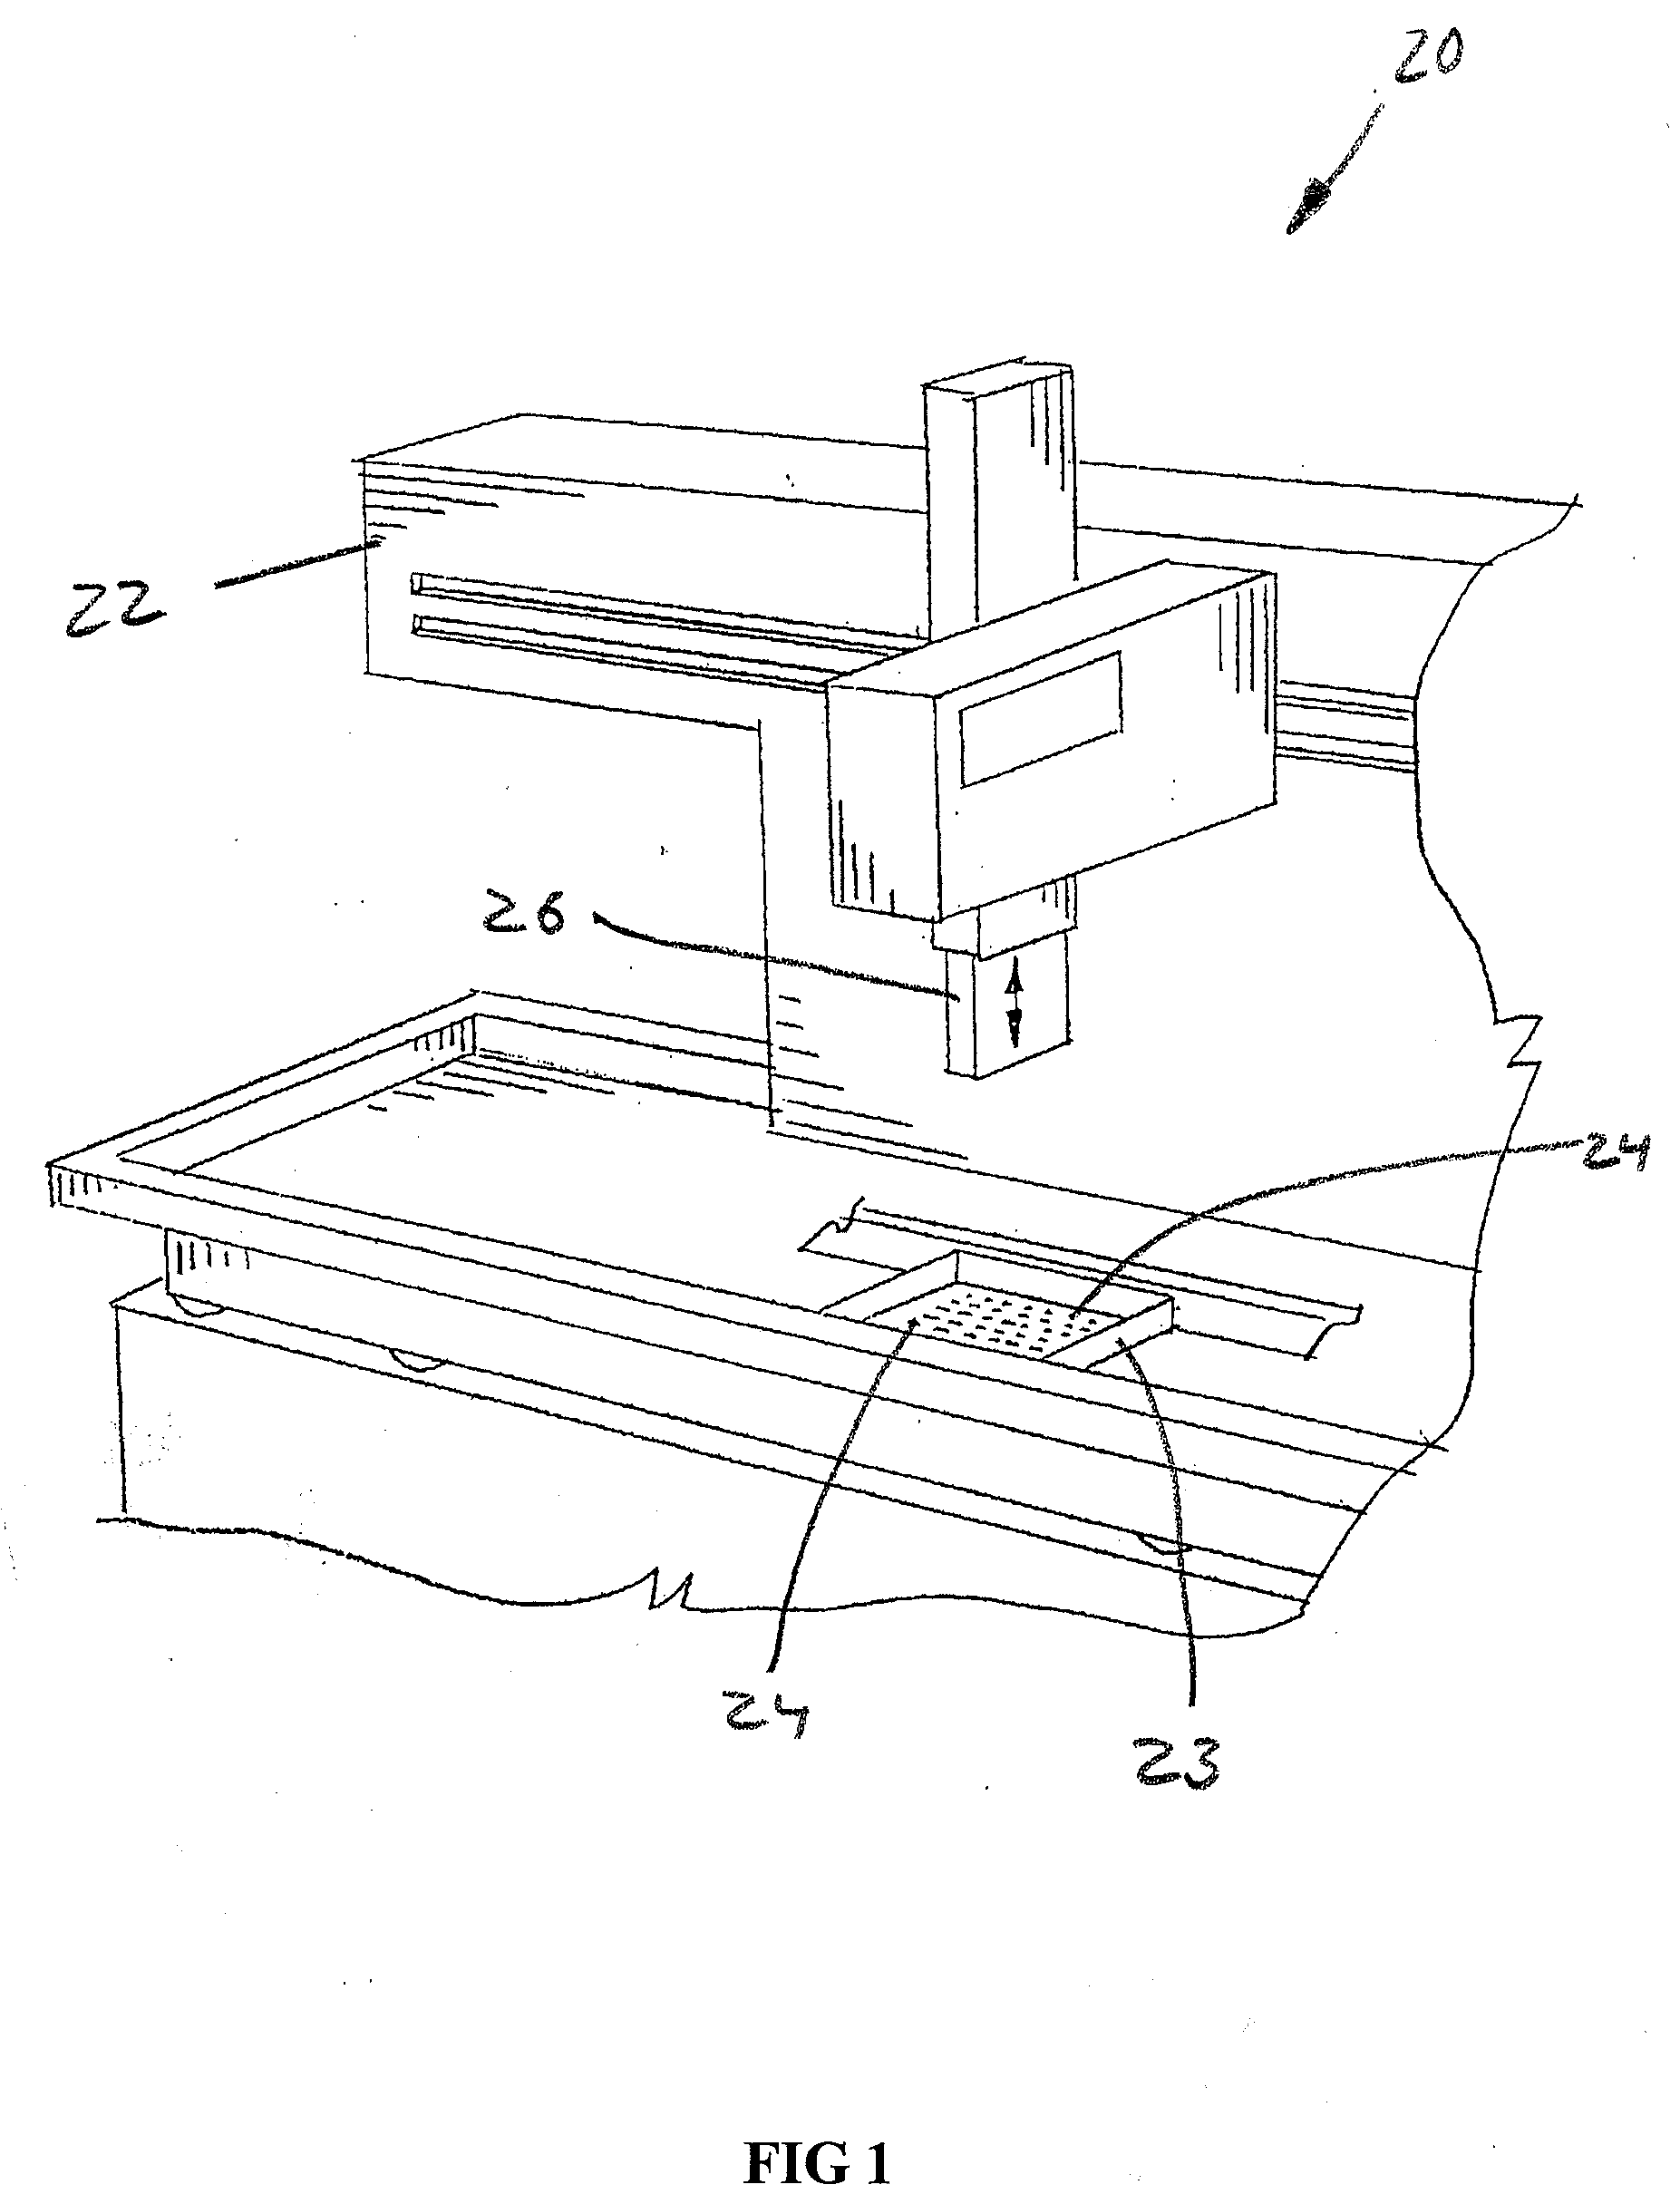 Gelation controlled fluid flow in a microscale device